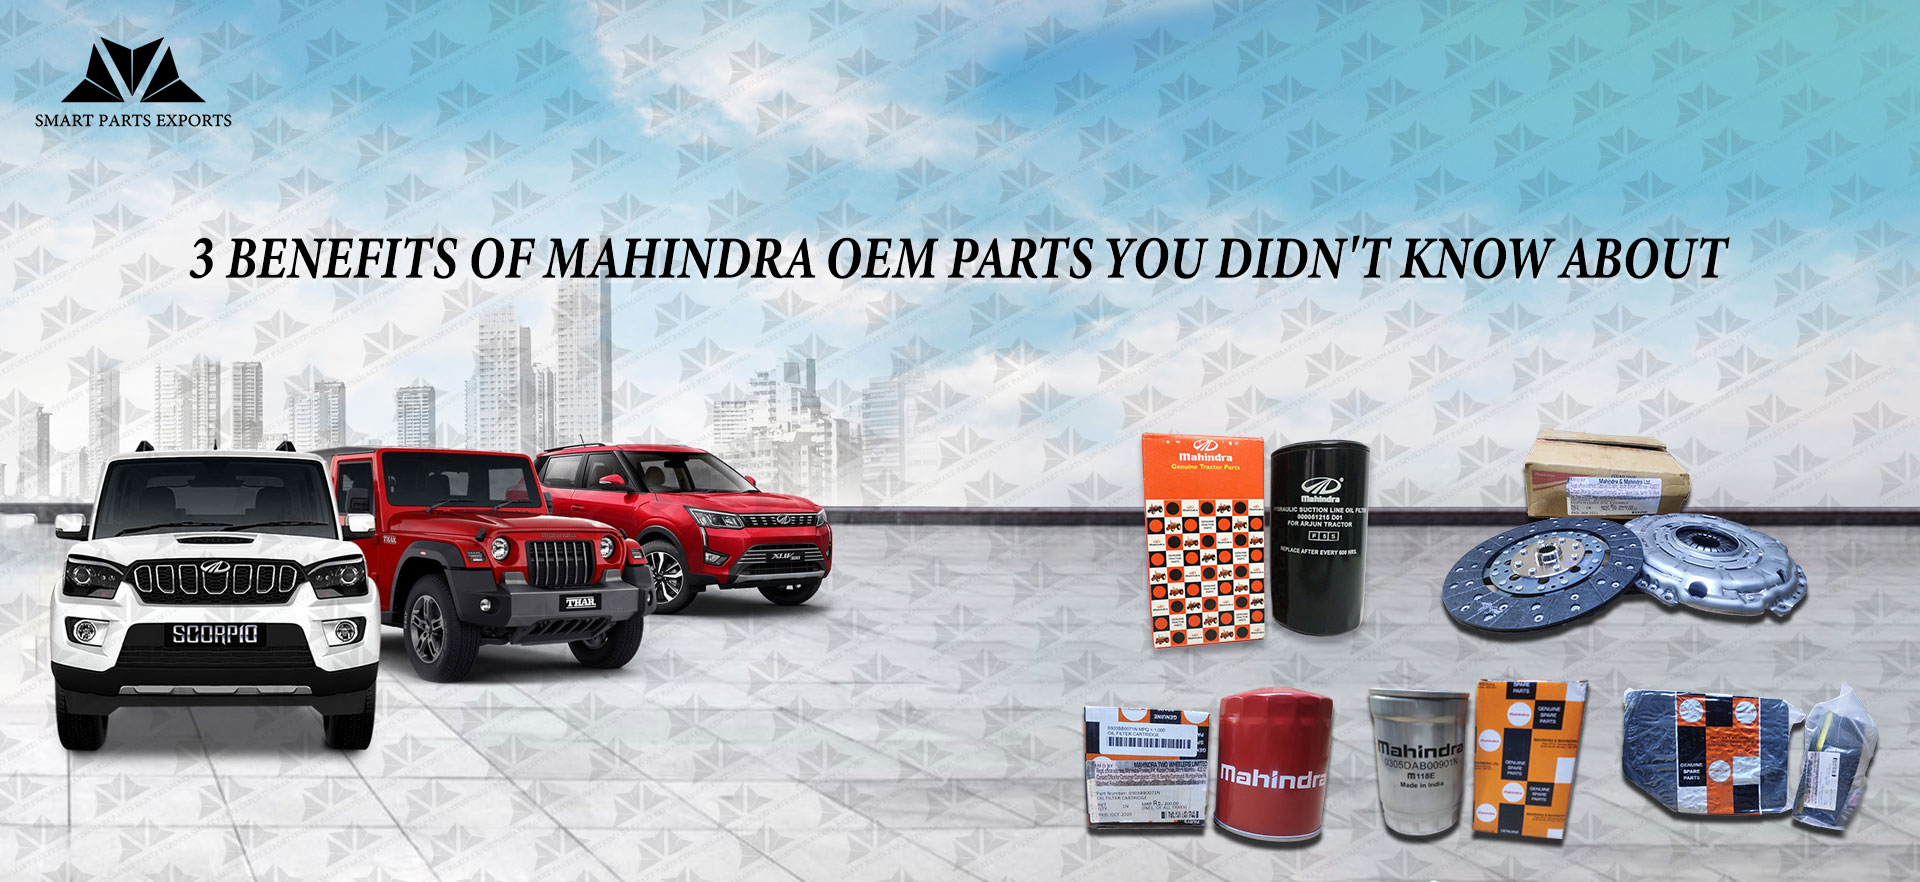 3 Benefits of Mahindra OEM Parts You Didn't Know About